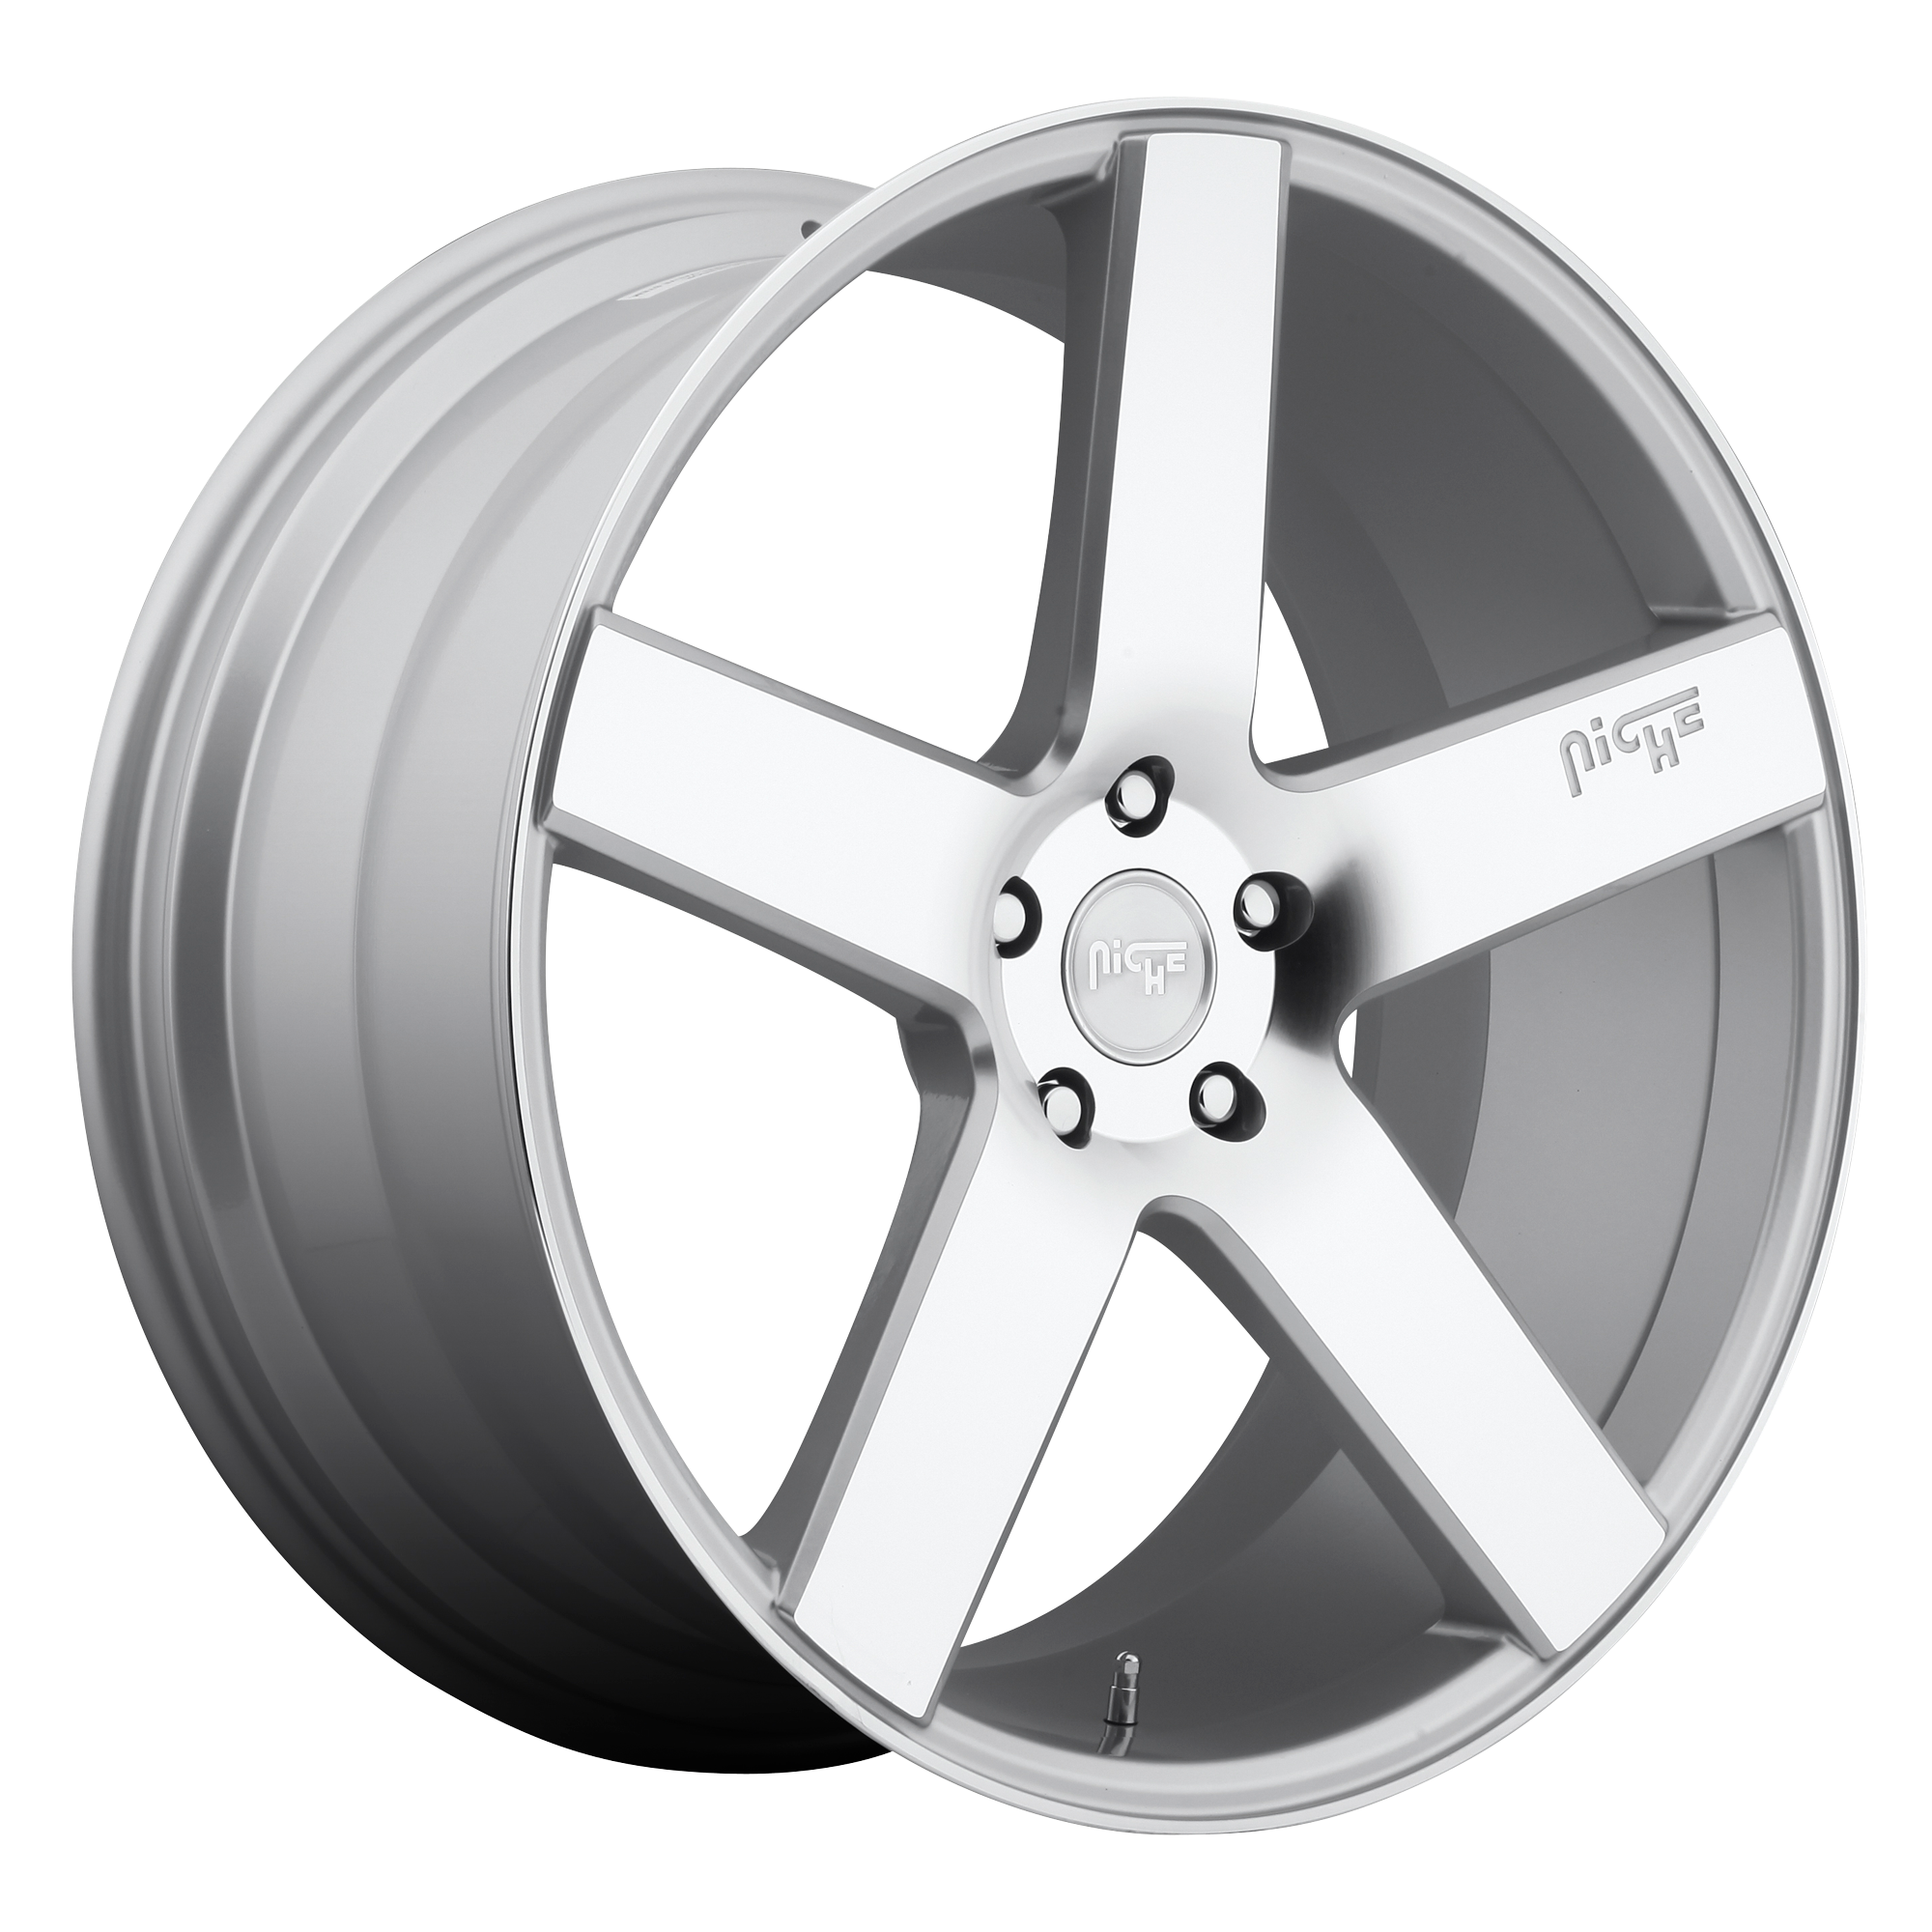 MILAN 20x8.5 5x120.00 GLOSS SILVER MACHINED (35 mm) - Tires and Engine Performance